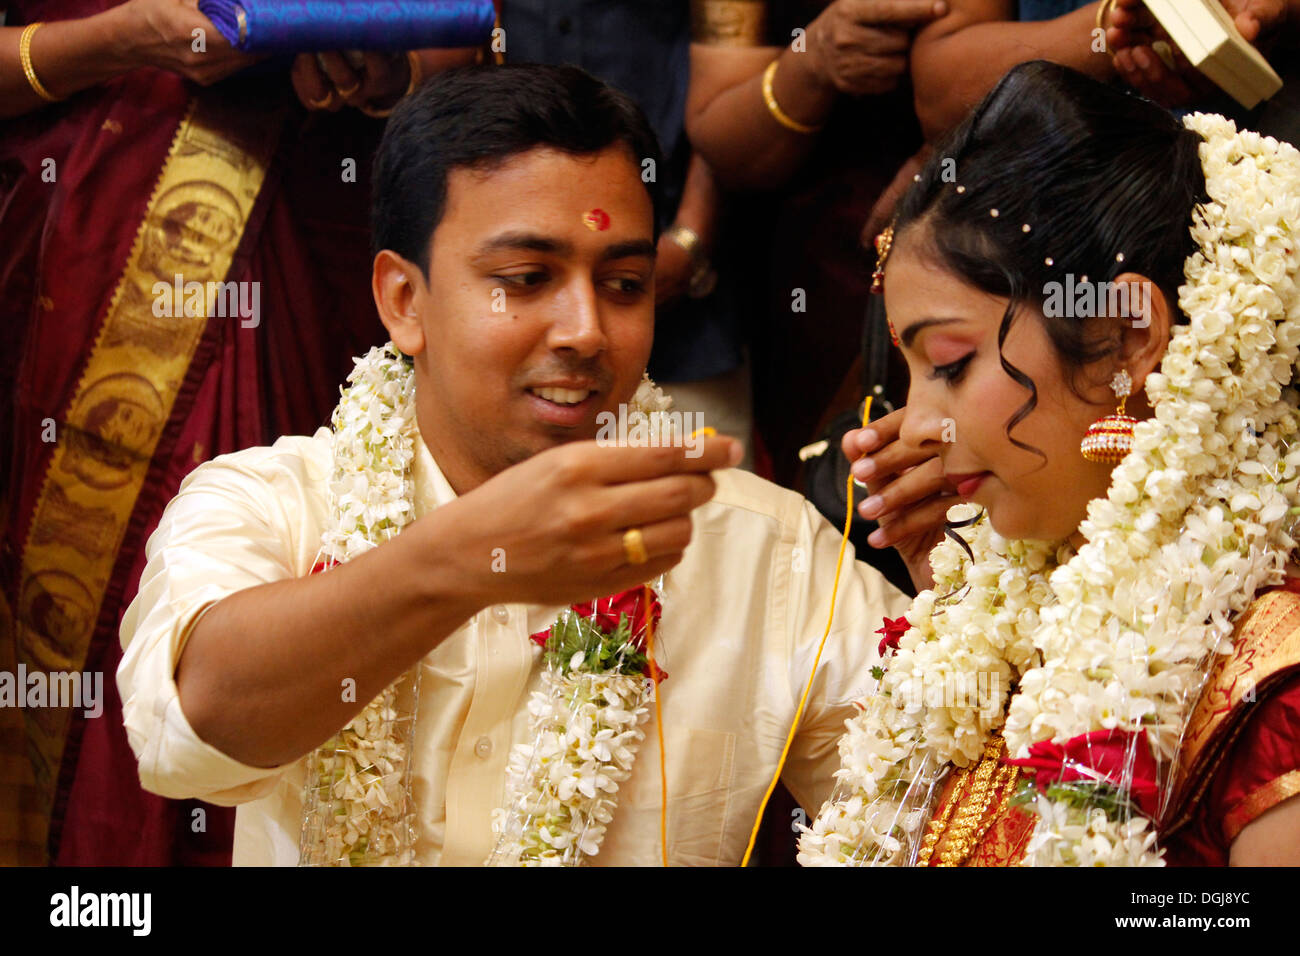 A hindu wedding ceremony in India.Tying the knot Stock Photo